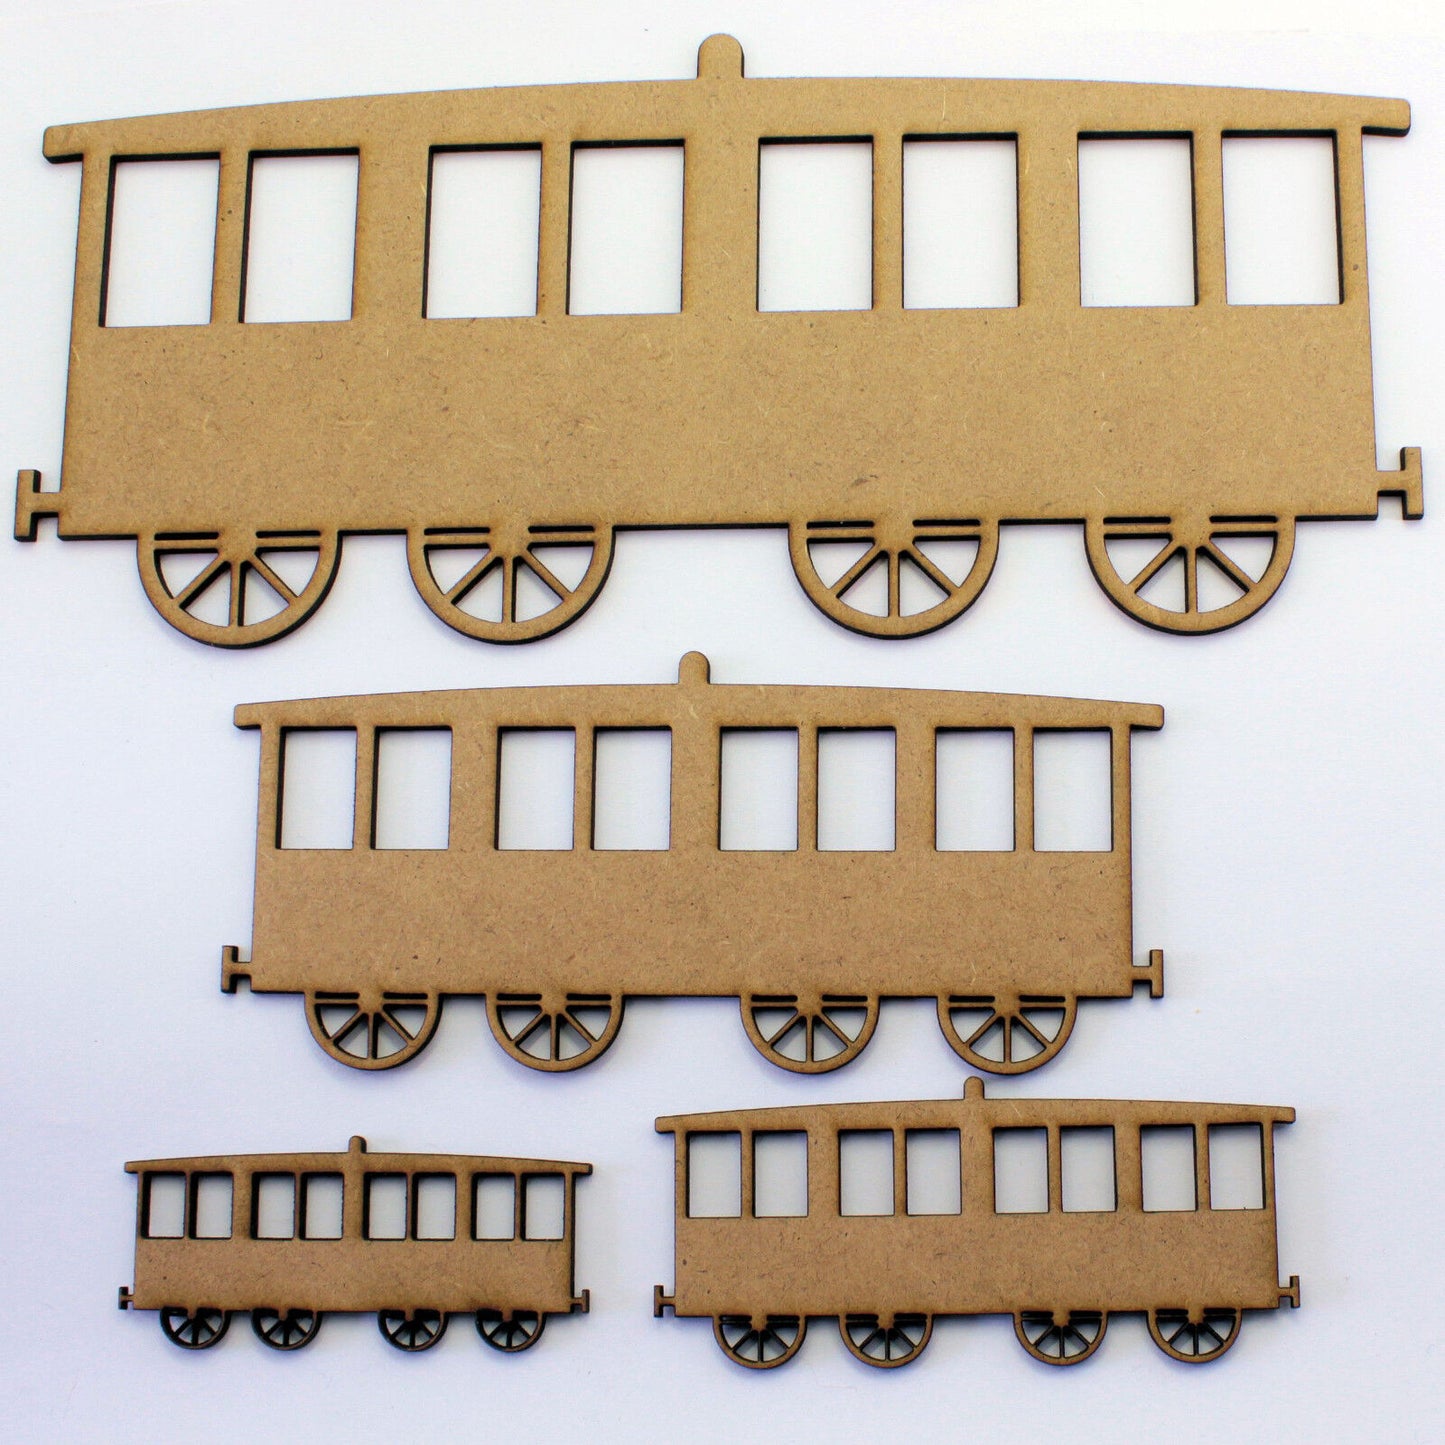 Train and Carriage Craft Shapes, Embellishments Decorations. 2mm MDF Wood